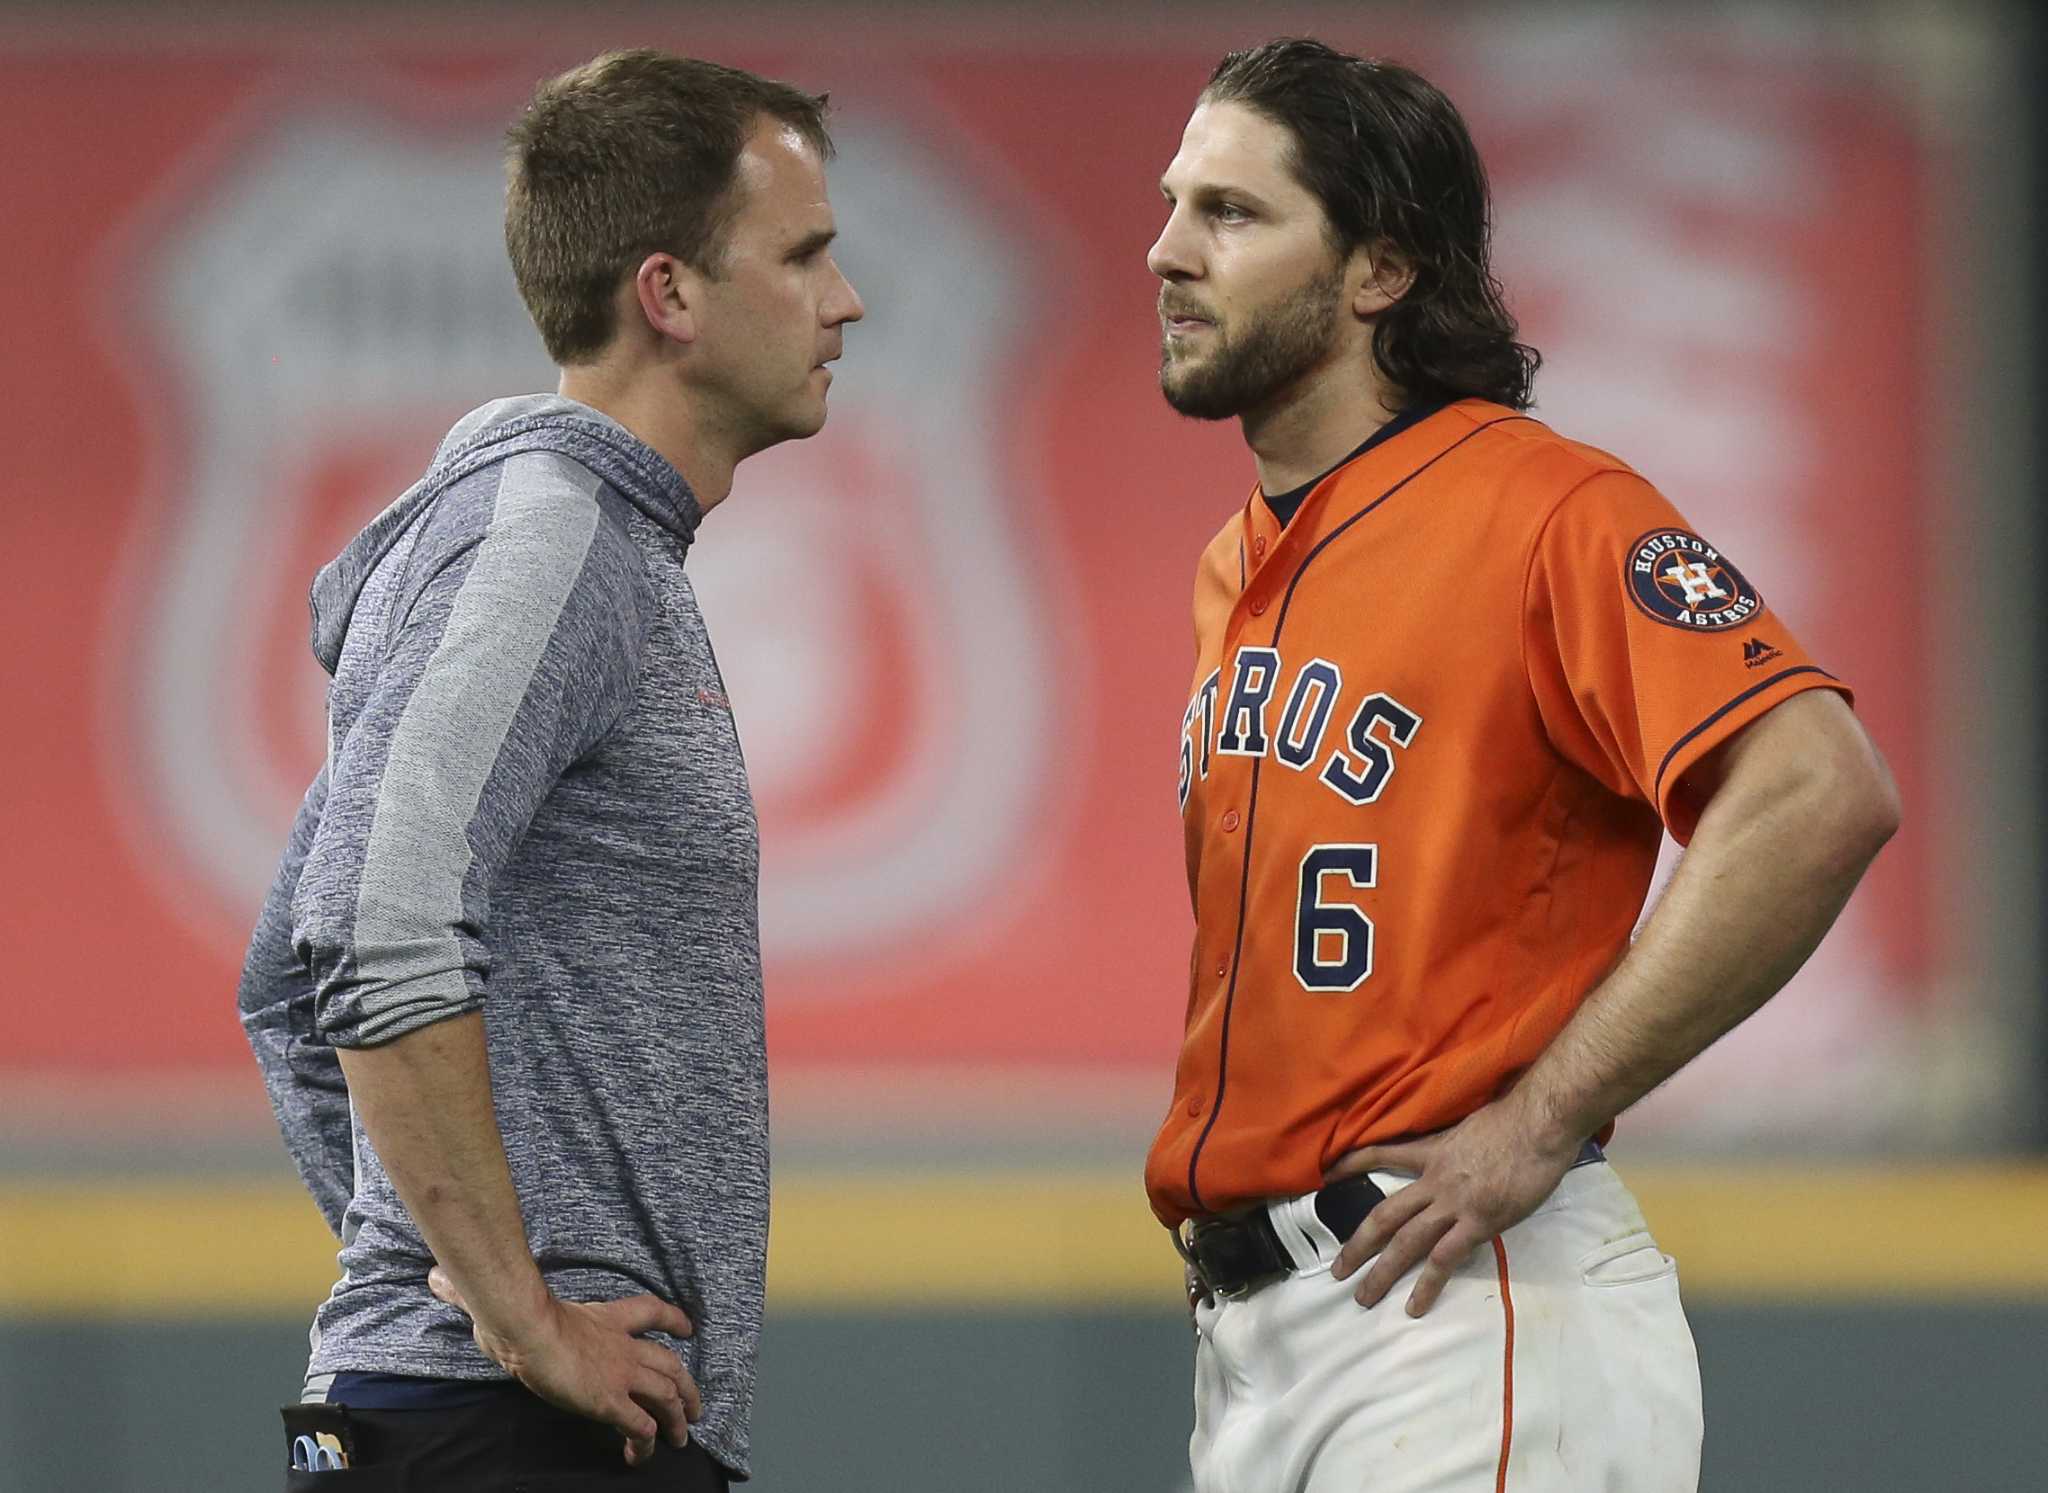 Astros' Jake Marisnick leaves game with 'knee discomfort